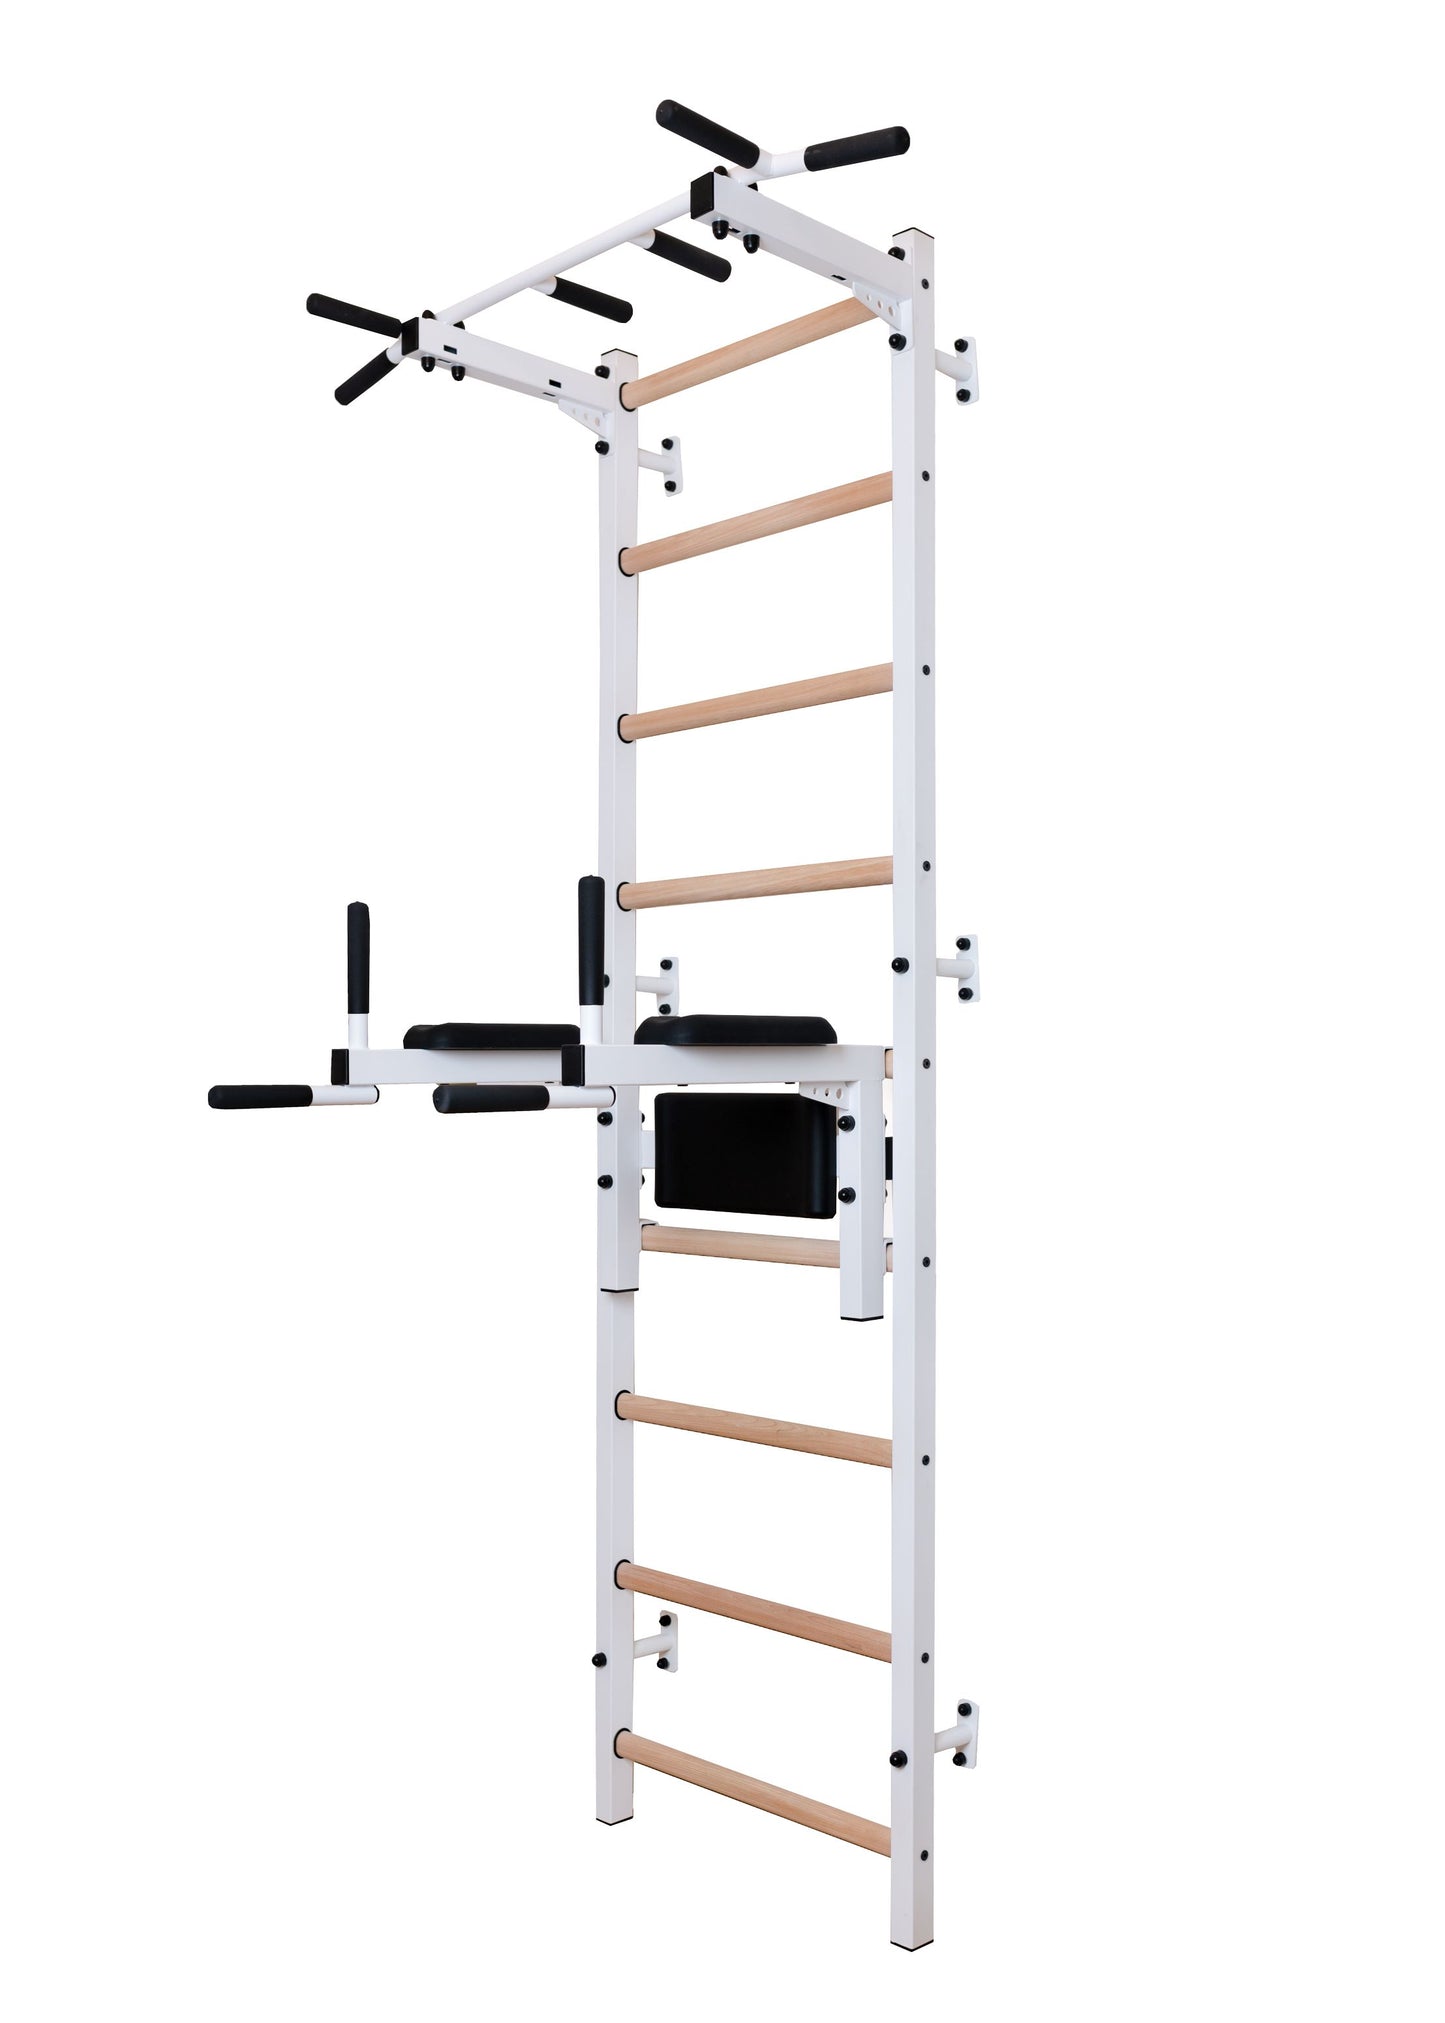 BenchK 722 - BenchK 7 Series Wall bars with fixed steel 6-grip pull-up bar and a dip bar with back support